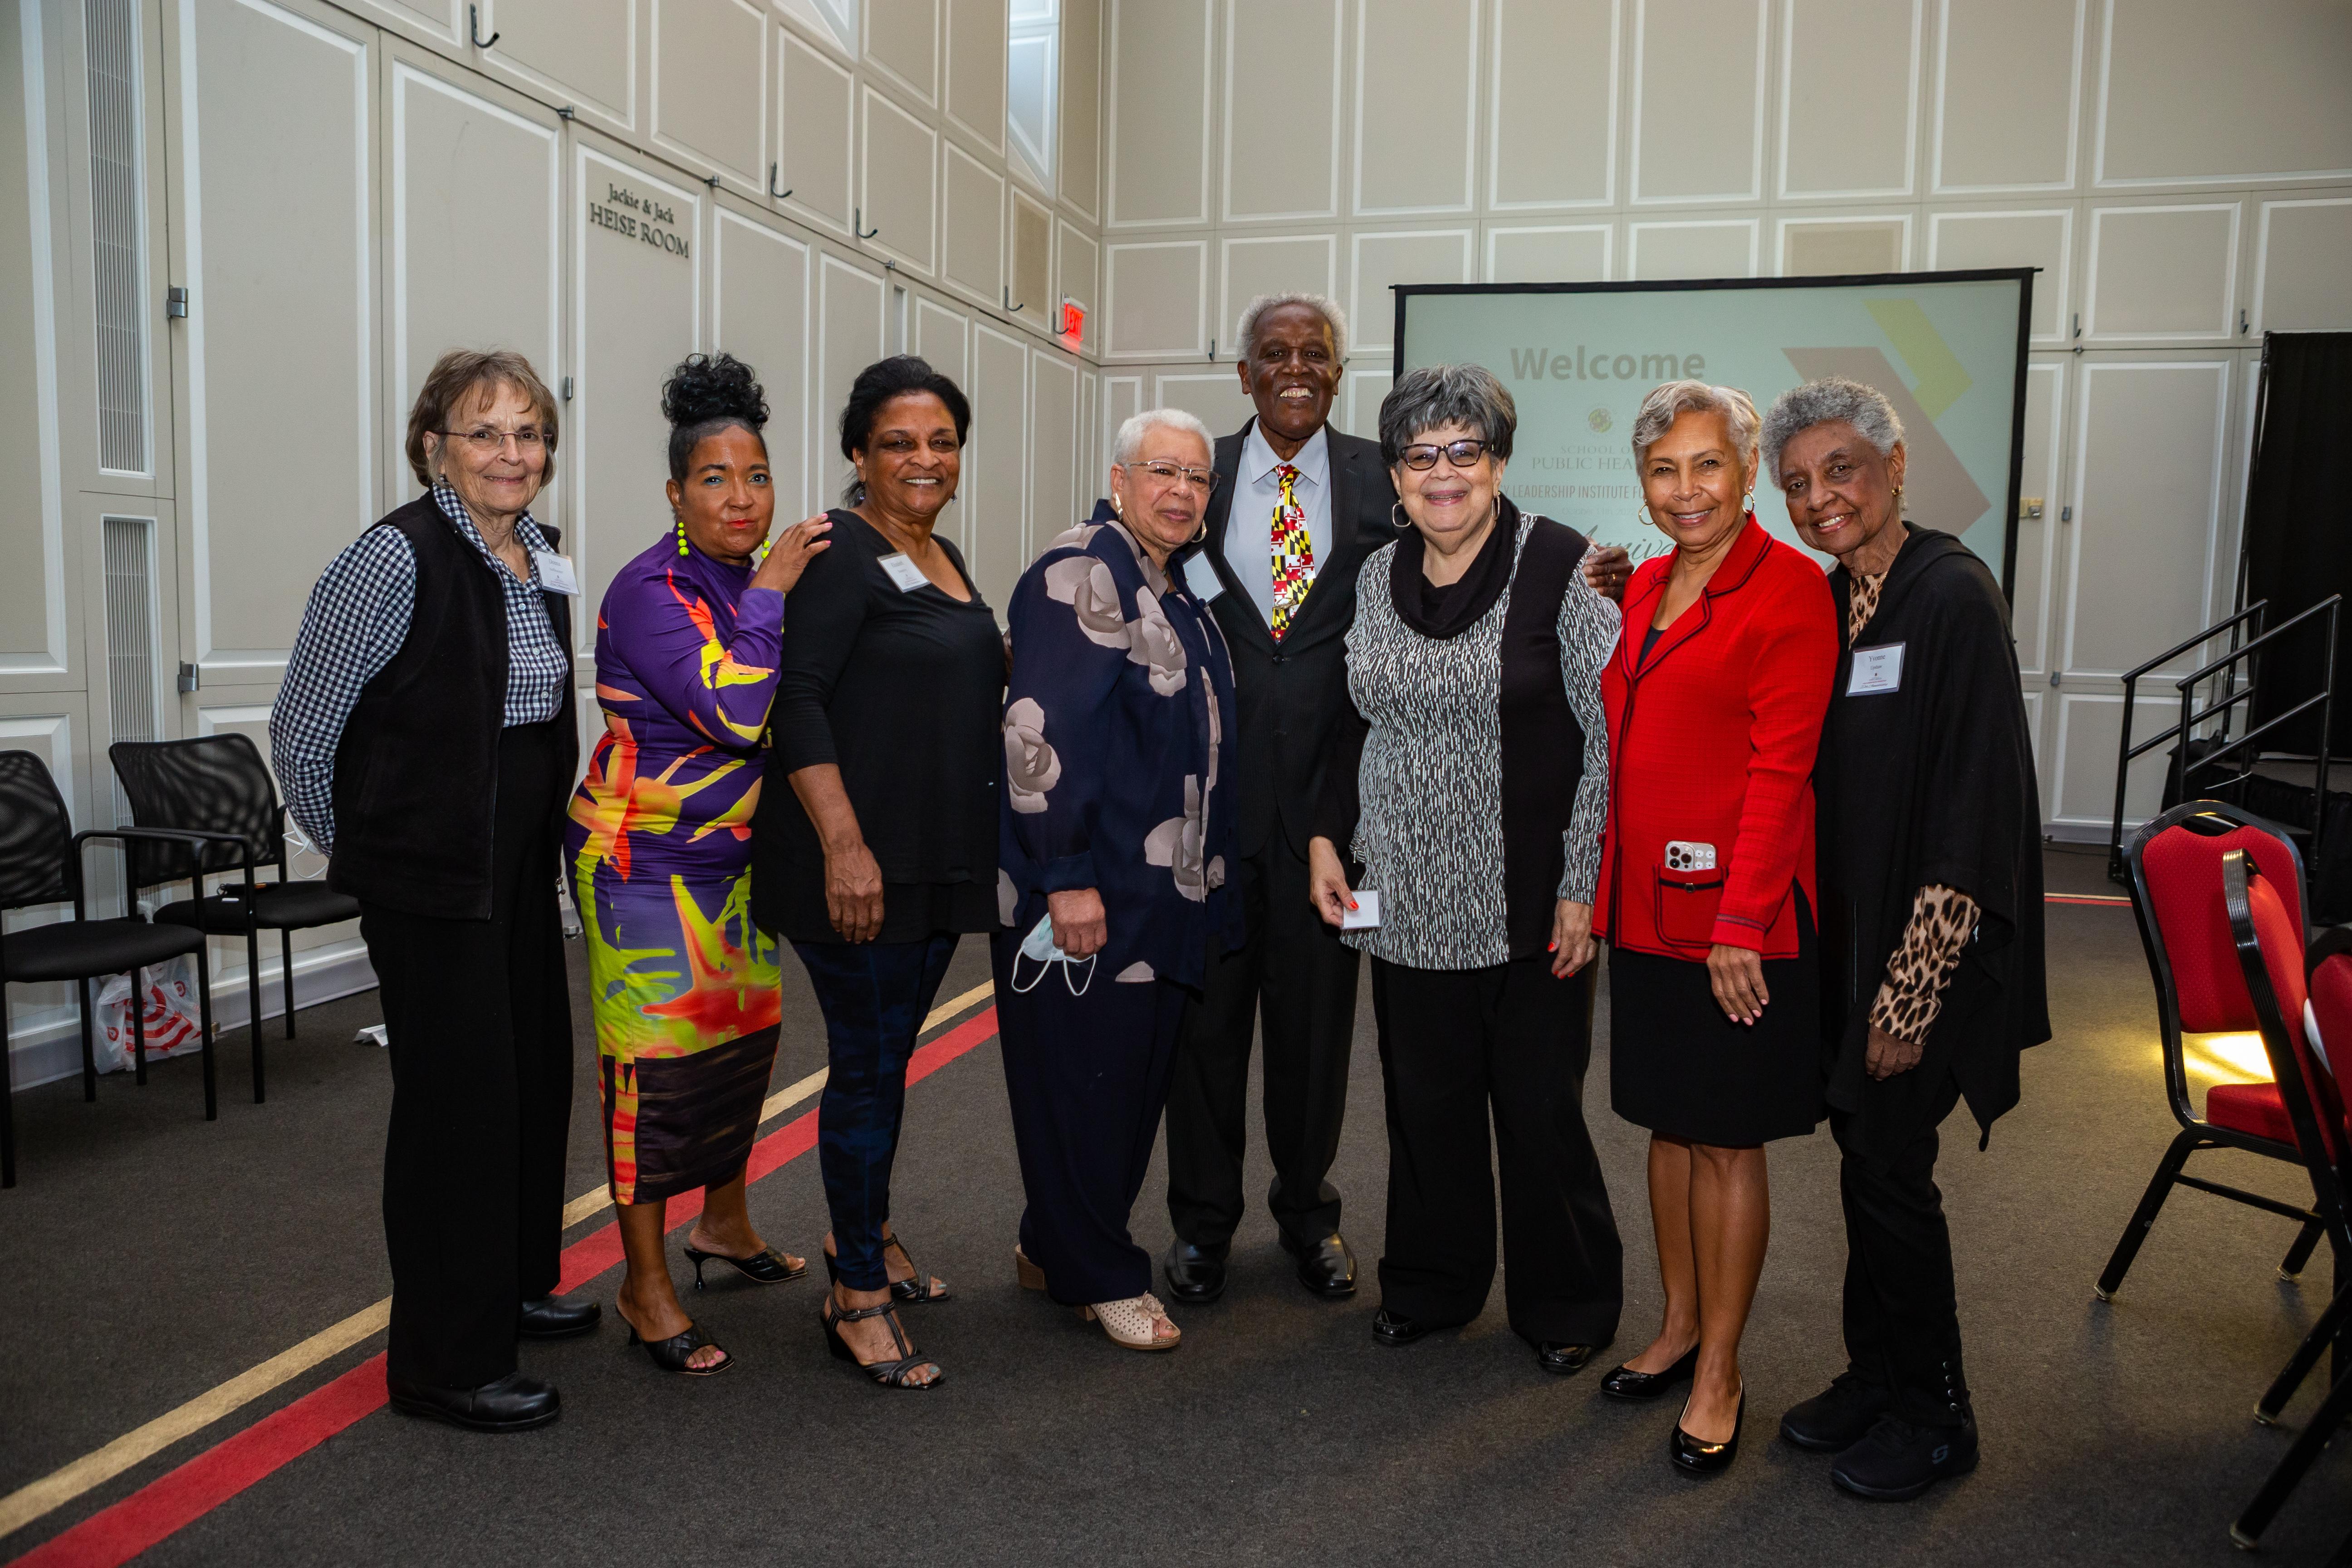 Supporters of the University of Maryland School of Public Health Legacy Leadership Institute for Public Policy gather to celebrate the program's 20th anniversary.